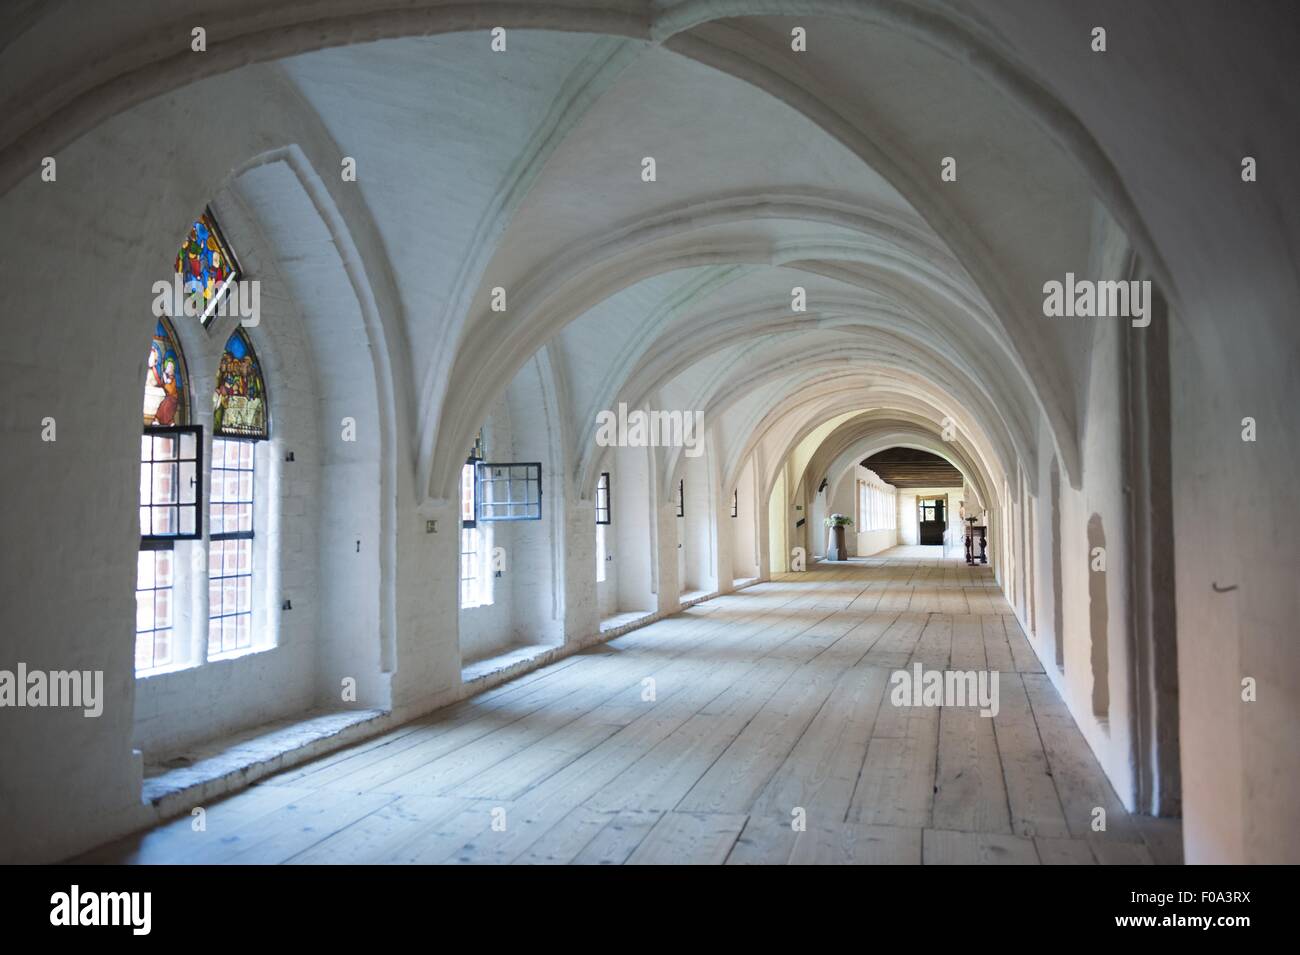 Interior of cloister in Wienhausen, Germany Stock Photo